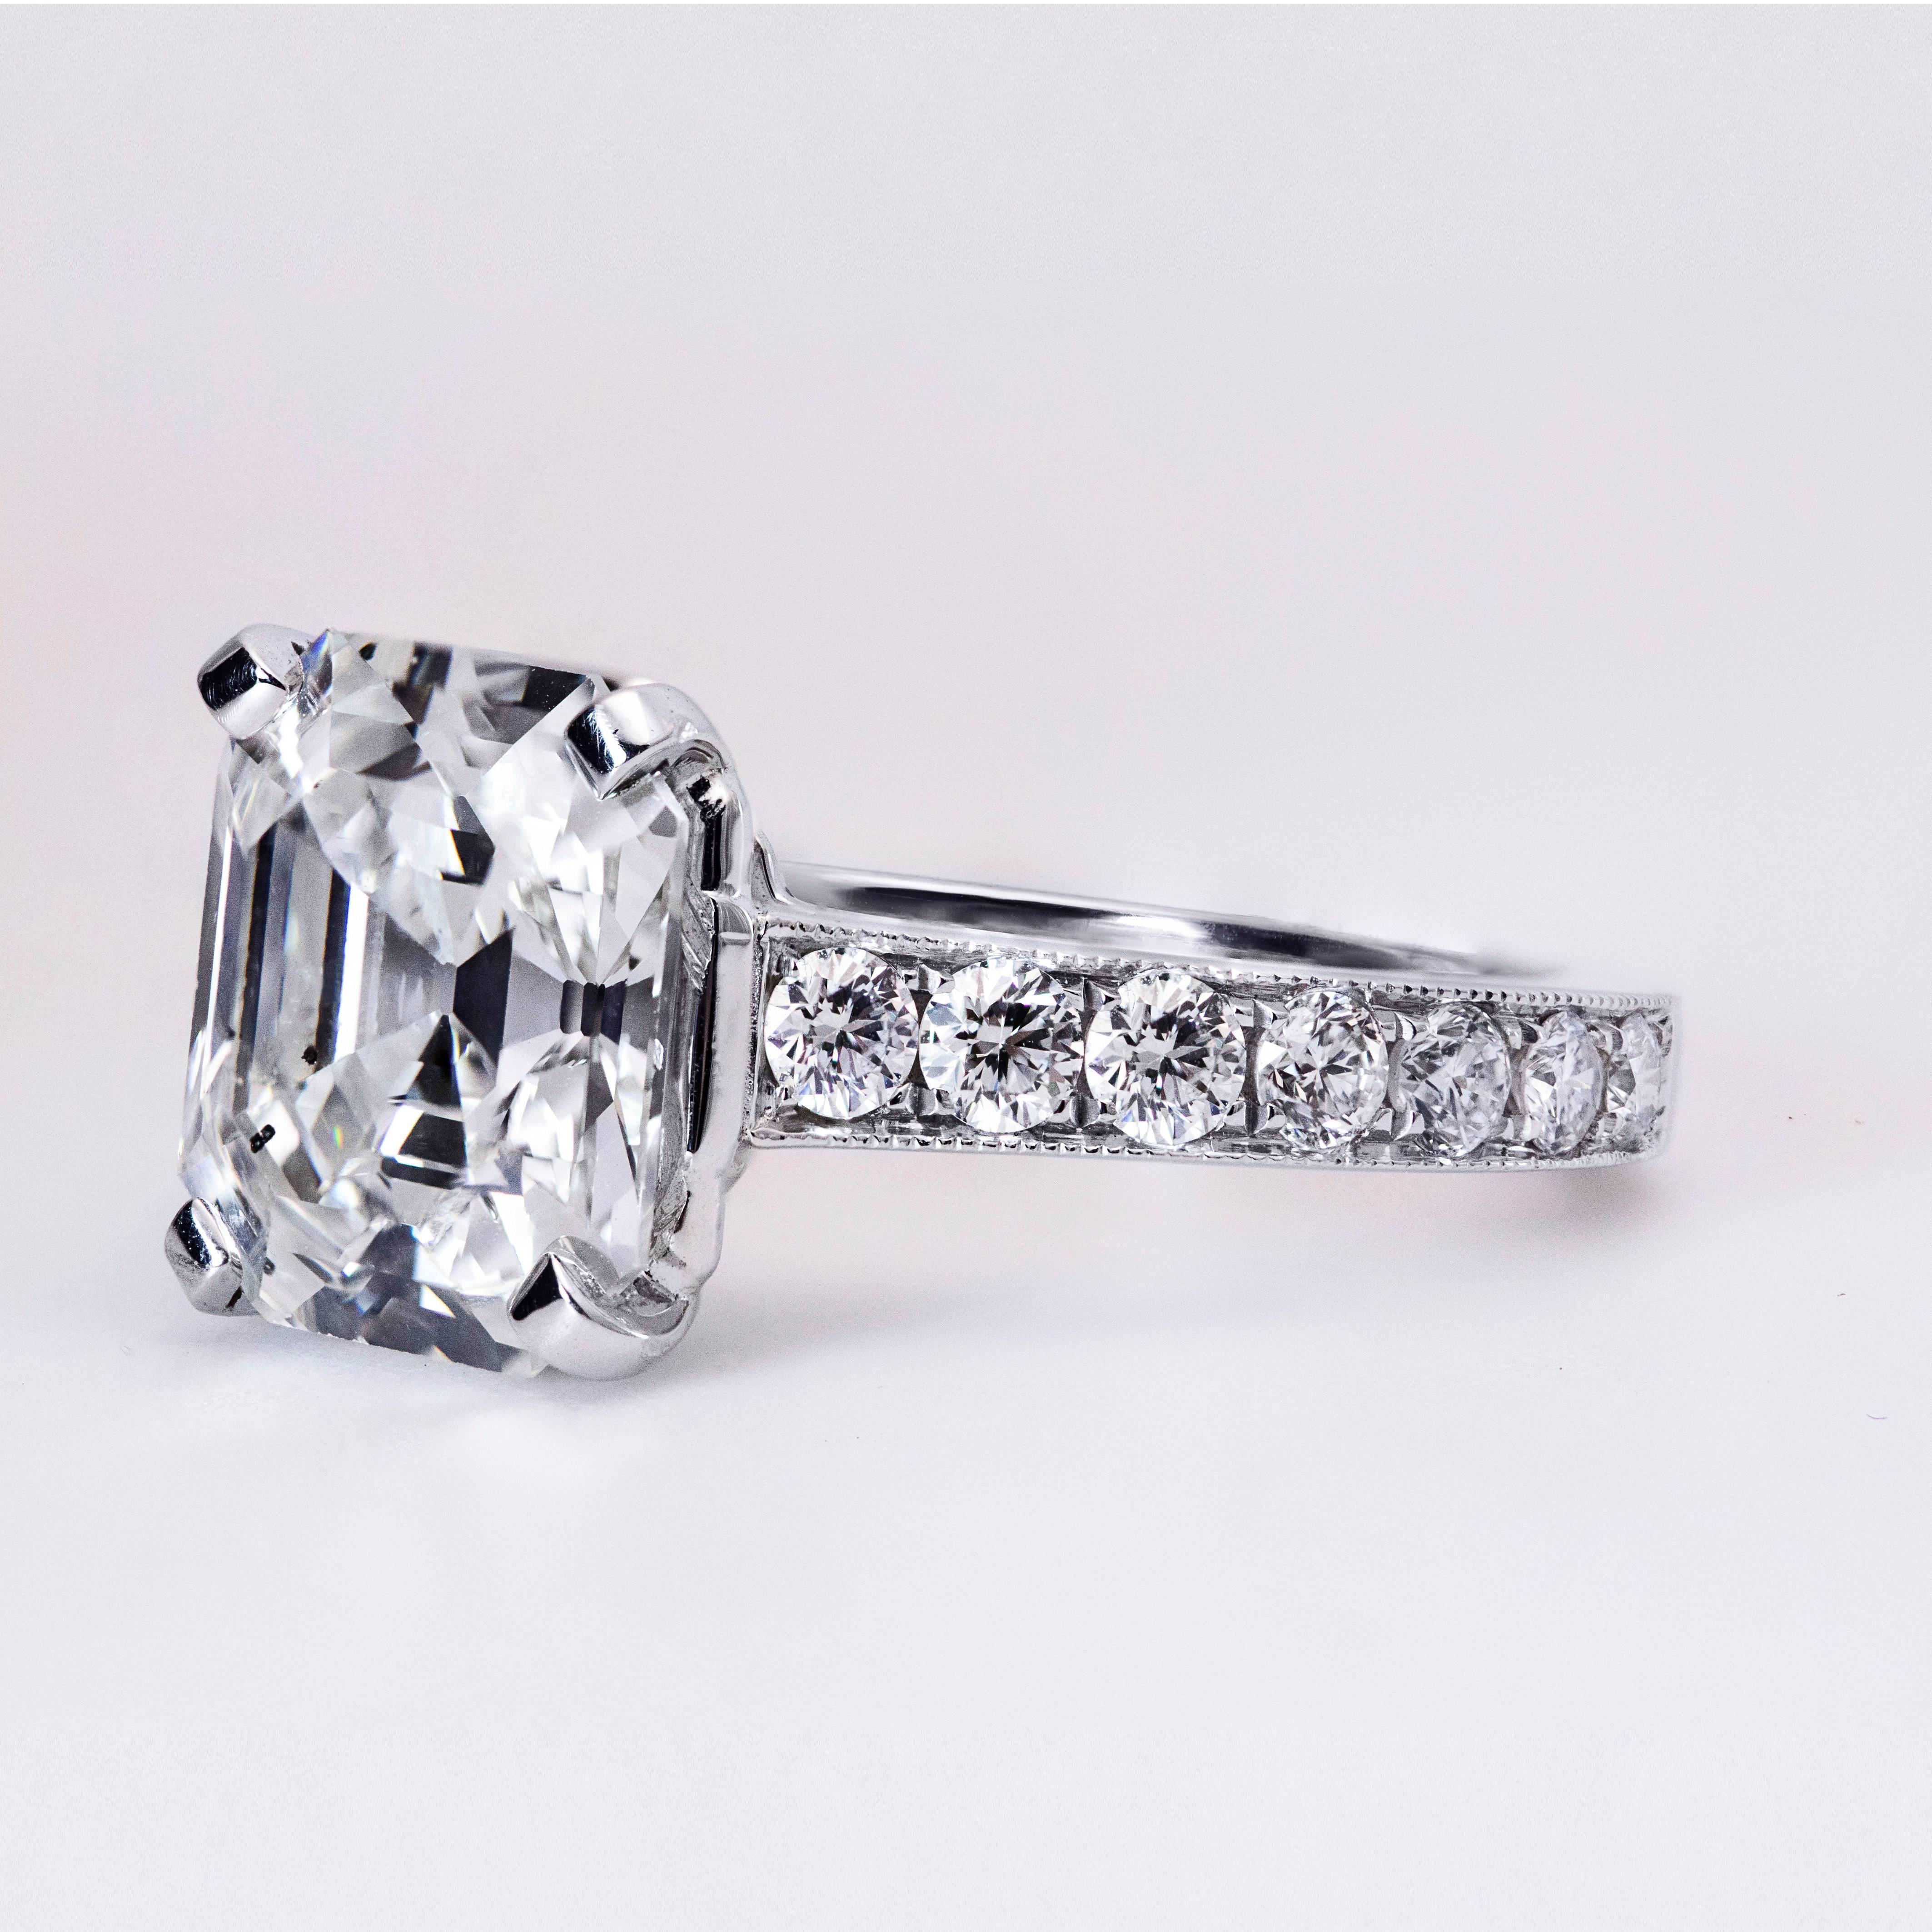 This ring features a 3.59 carat asscher cut diamond center stone that HRD certified as H color and SI1 clarity. The shank is set with 7 round brilliant diamonds on each side. Total weight of the accent diamonds is 0.70 carats. Made in Platinum. Size